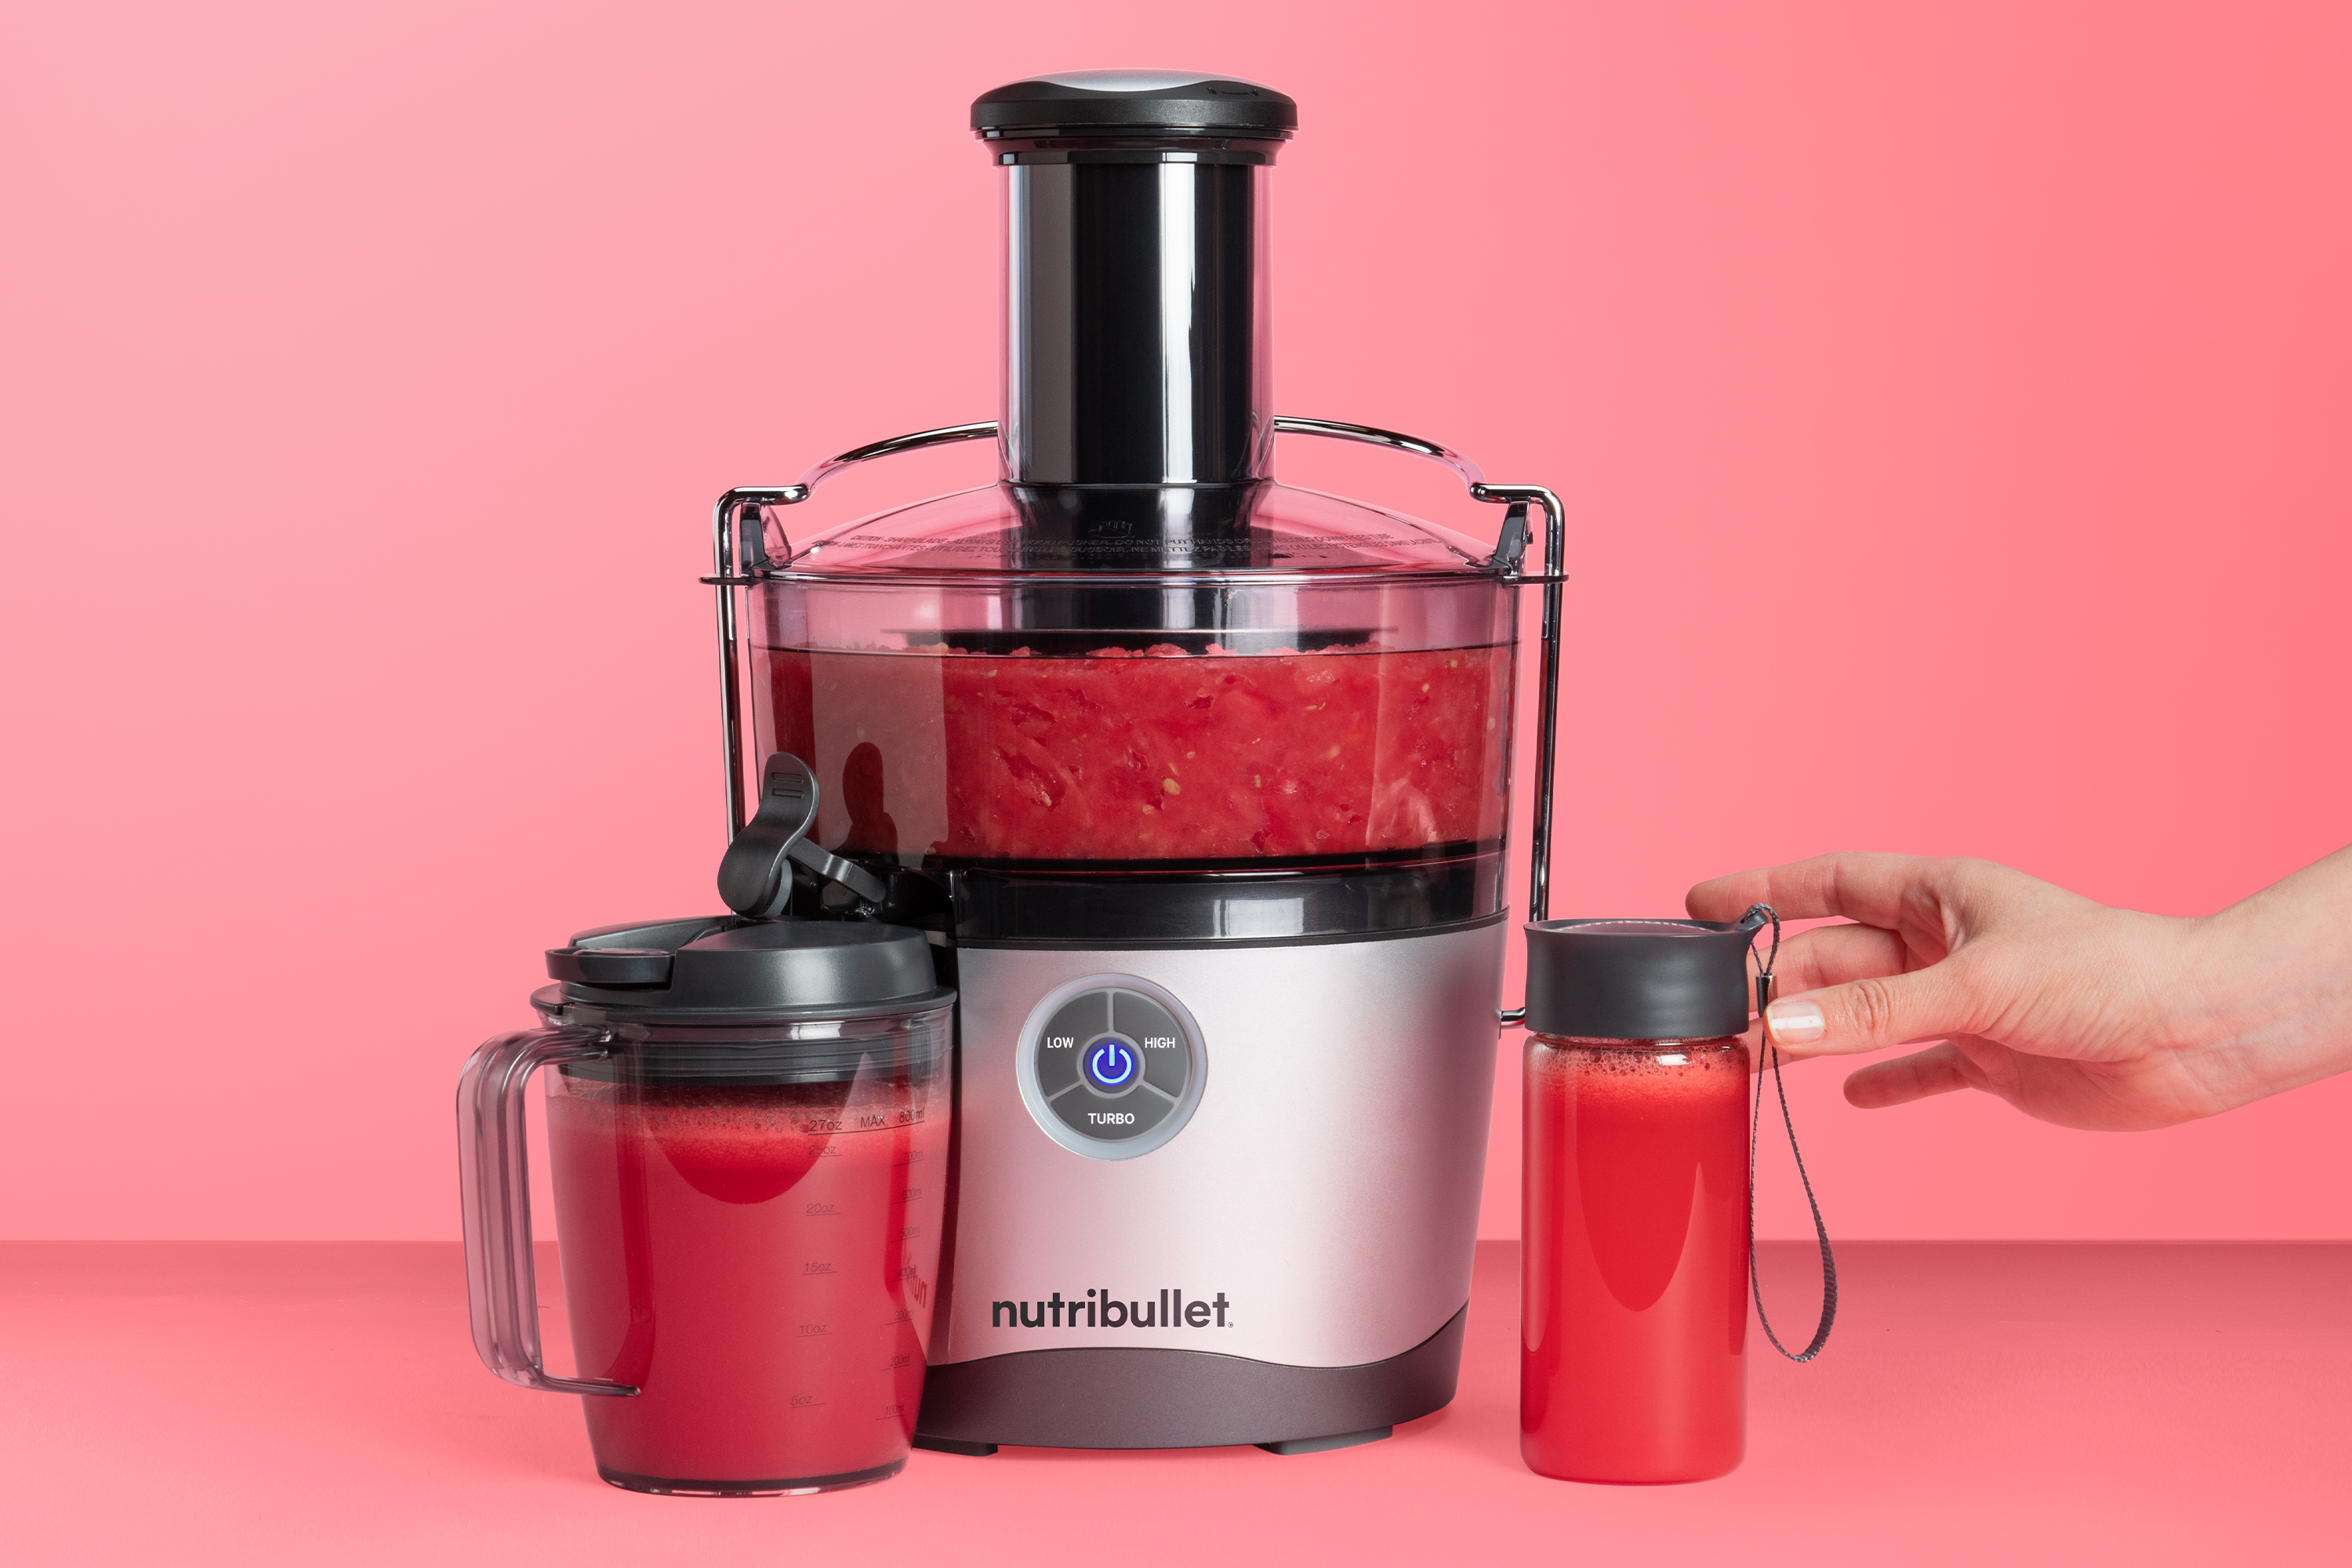 red watermelon juice with nutribullet juicer and pitcher